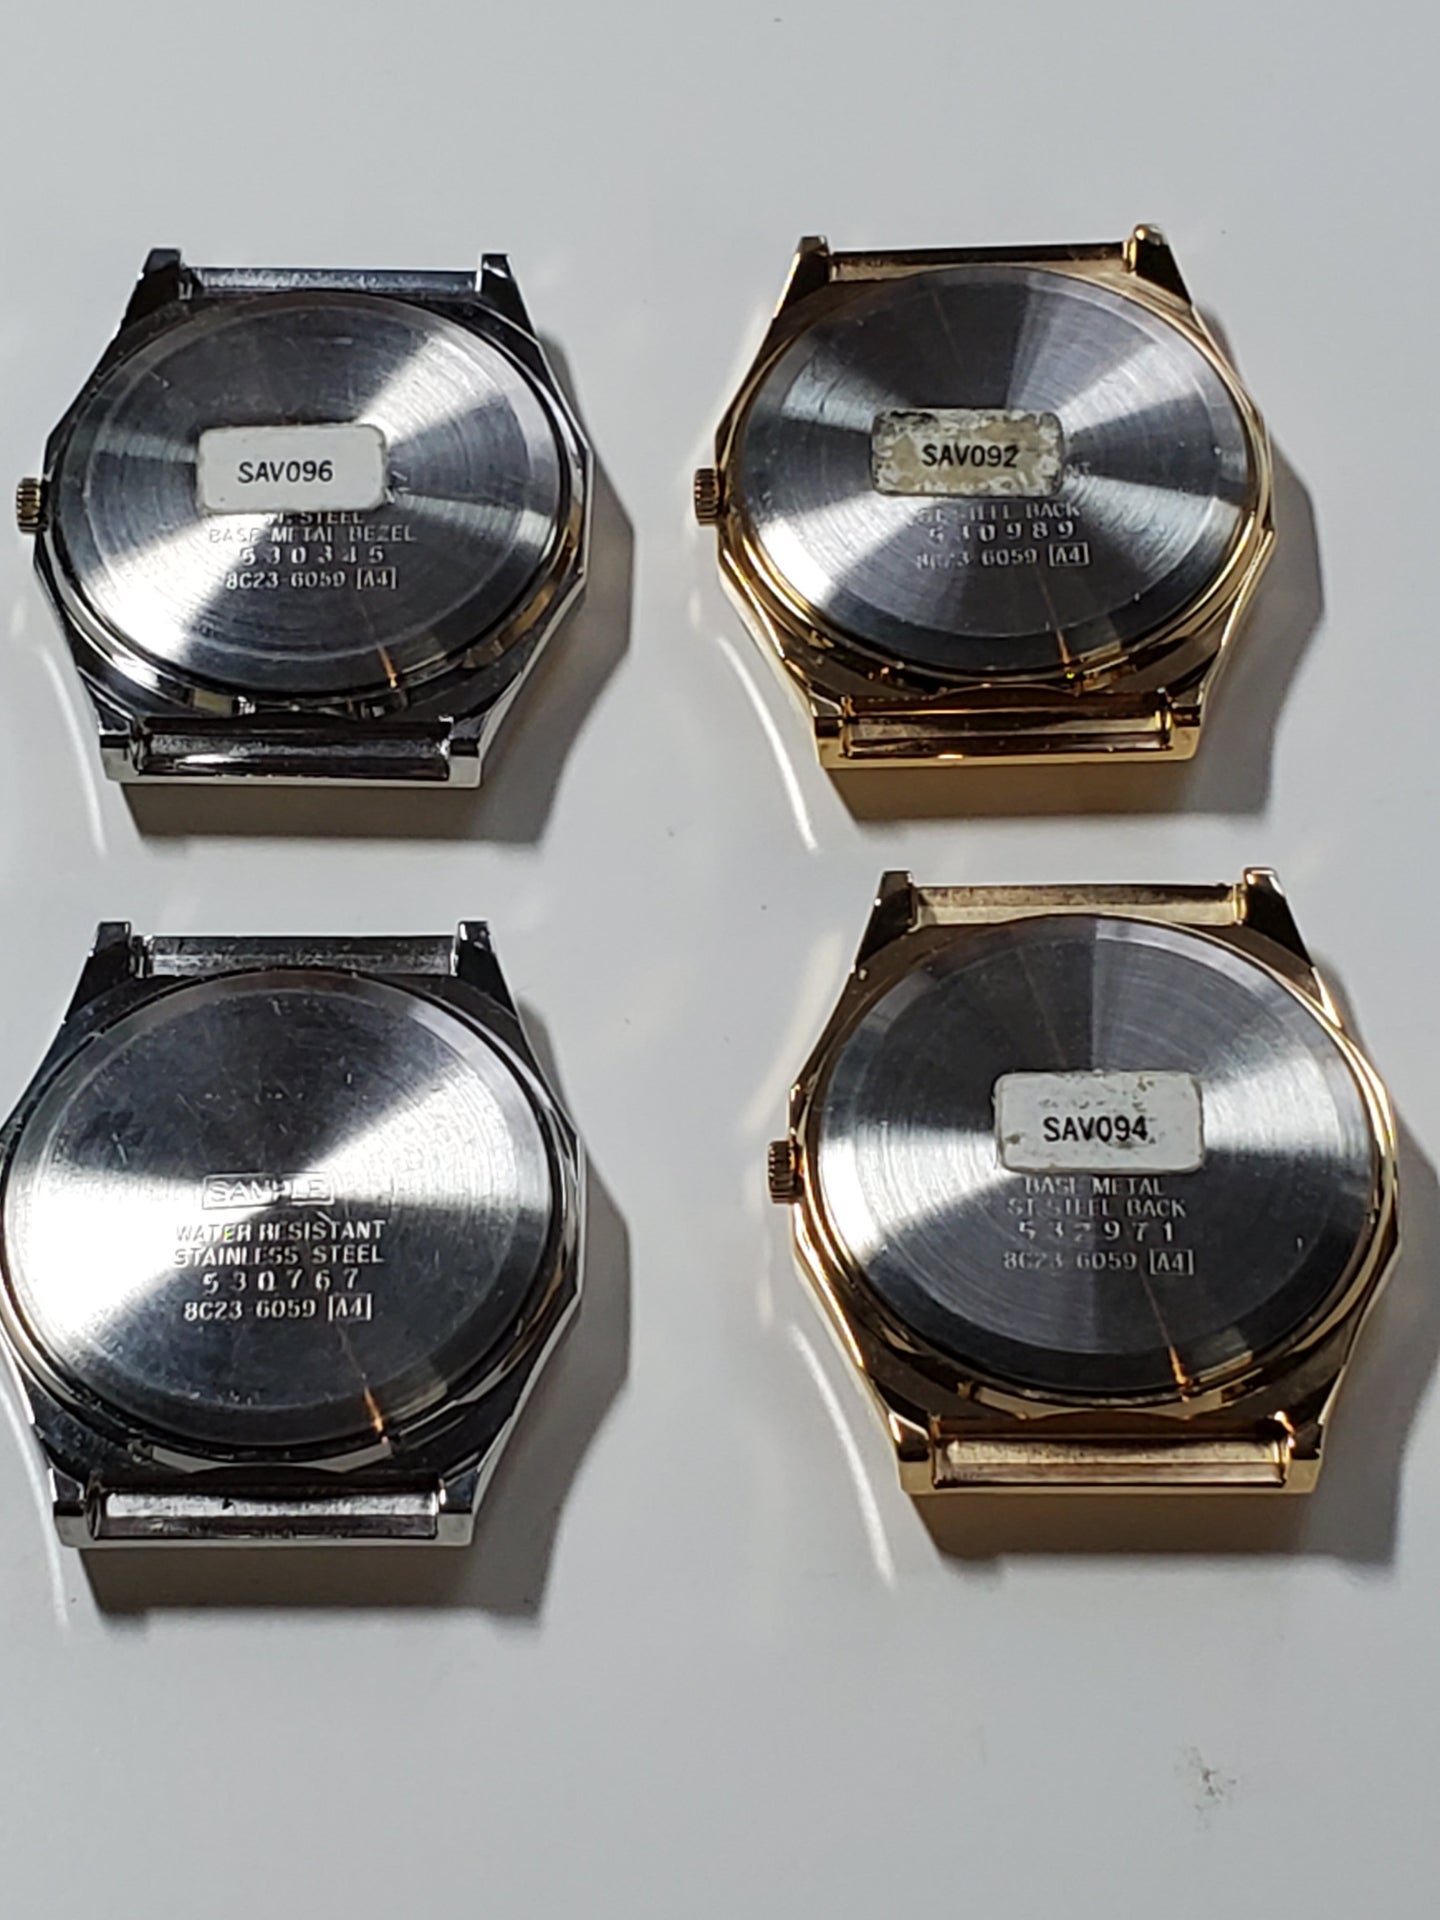 FS: Seiko 8C23 Dress Watch Sample Cases $50 ea. | The Watch Site